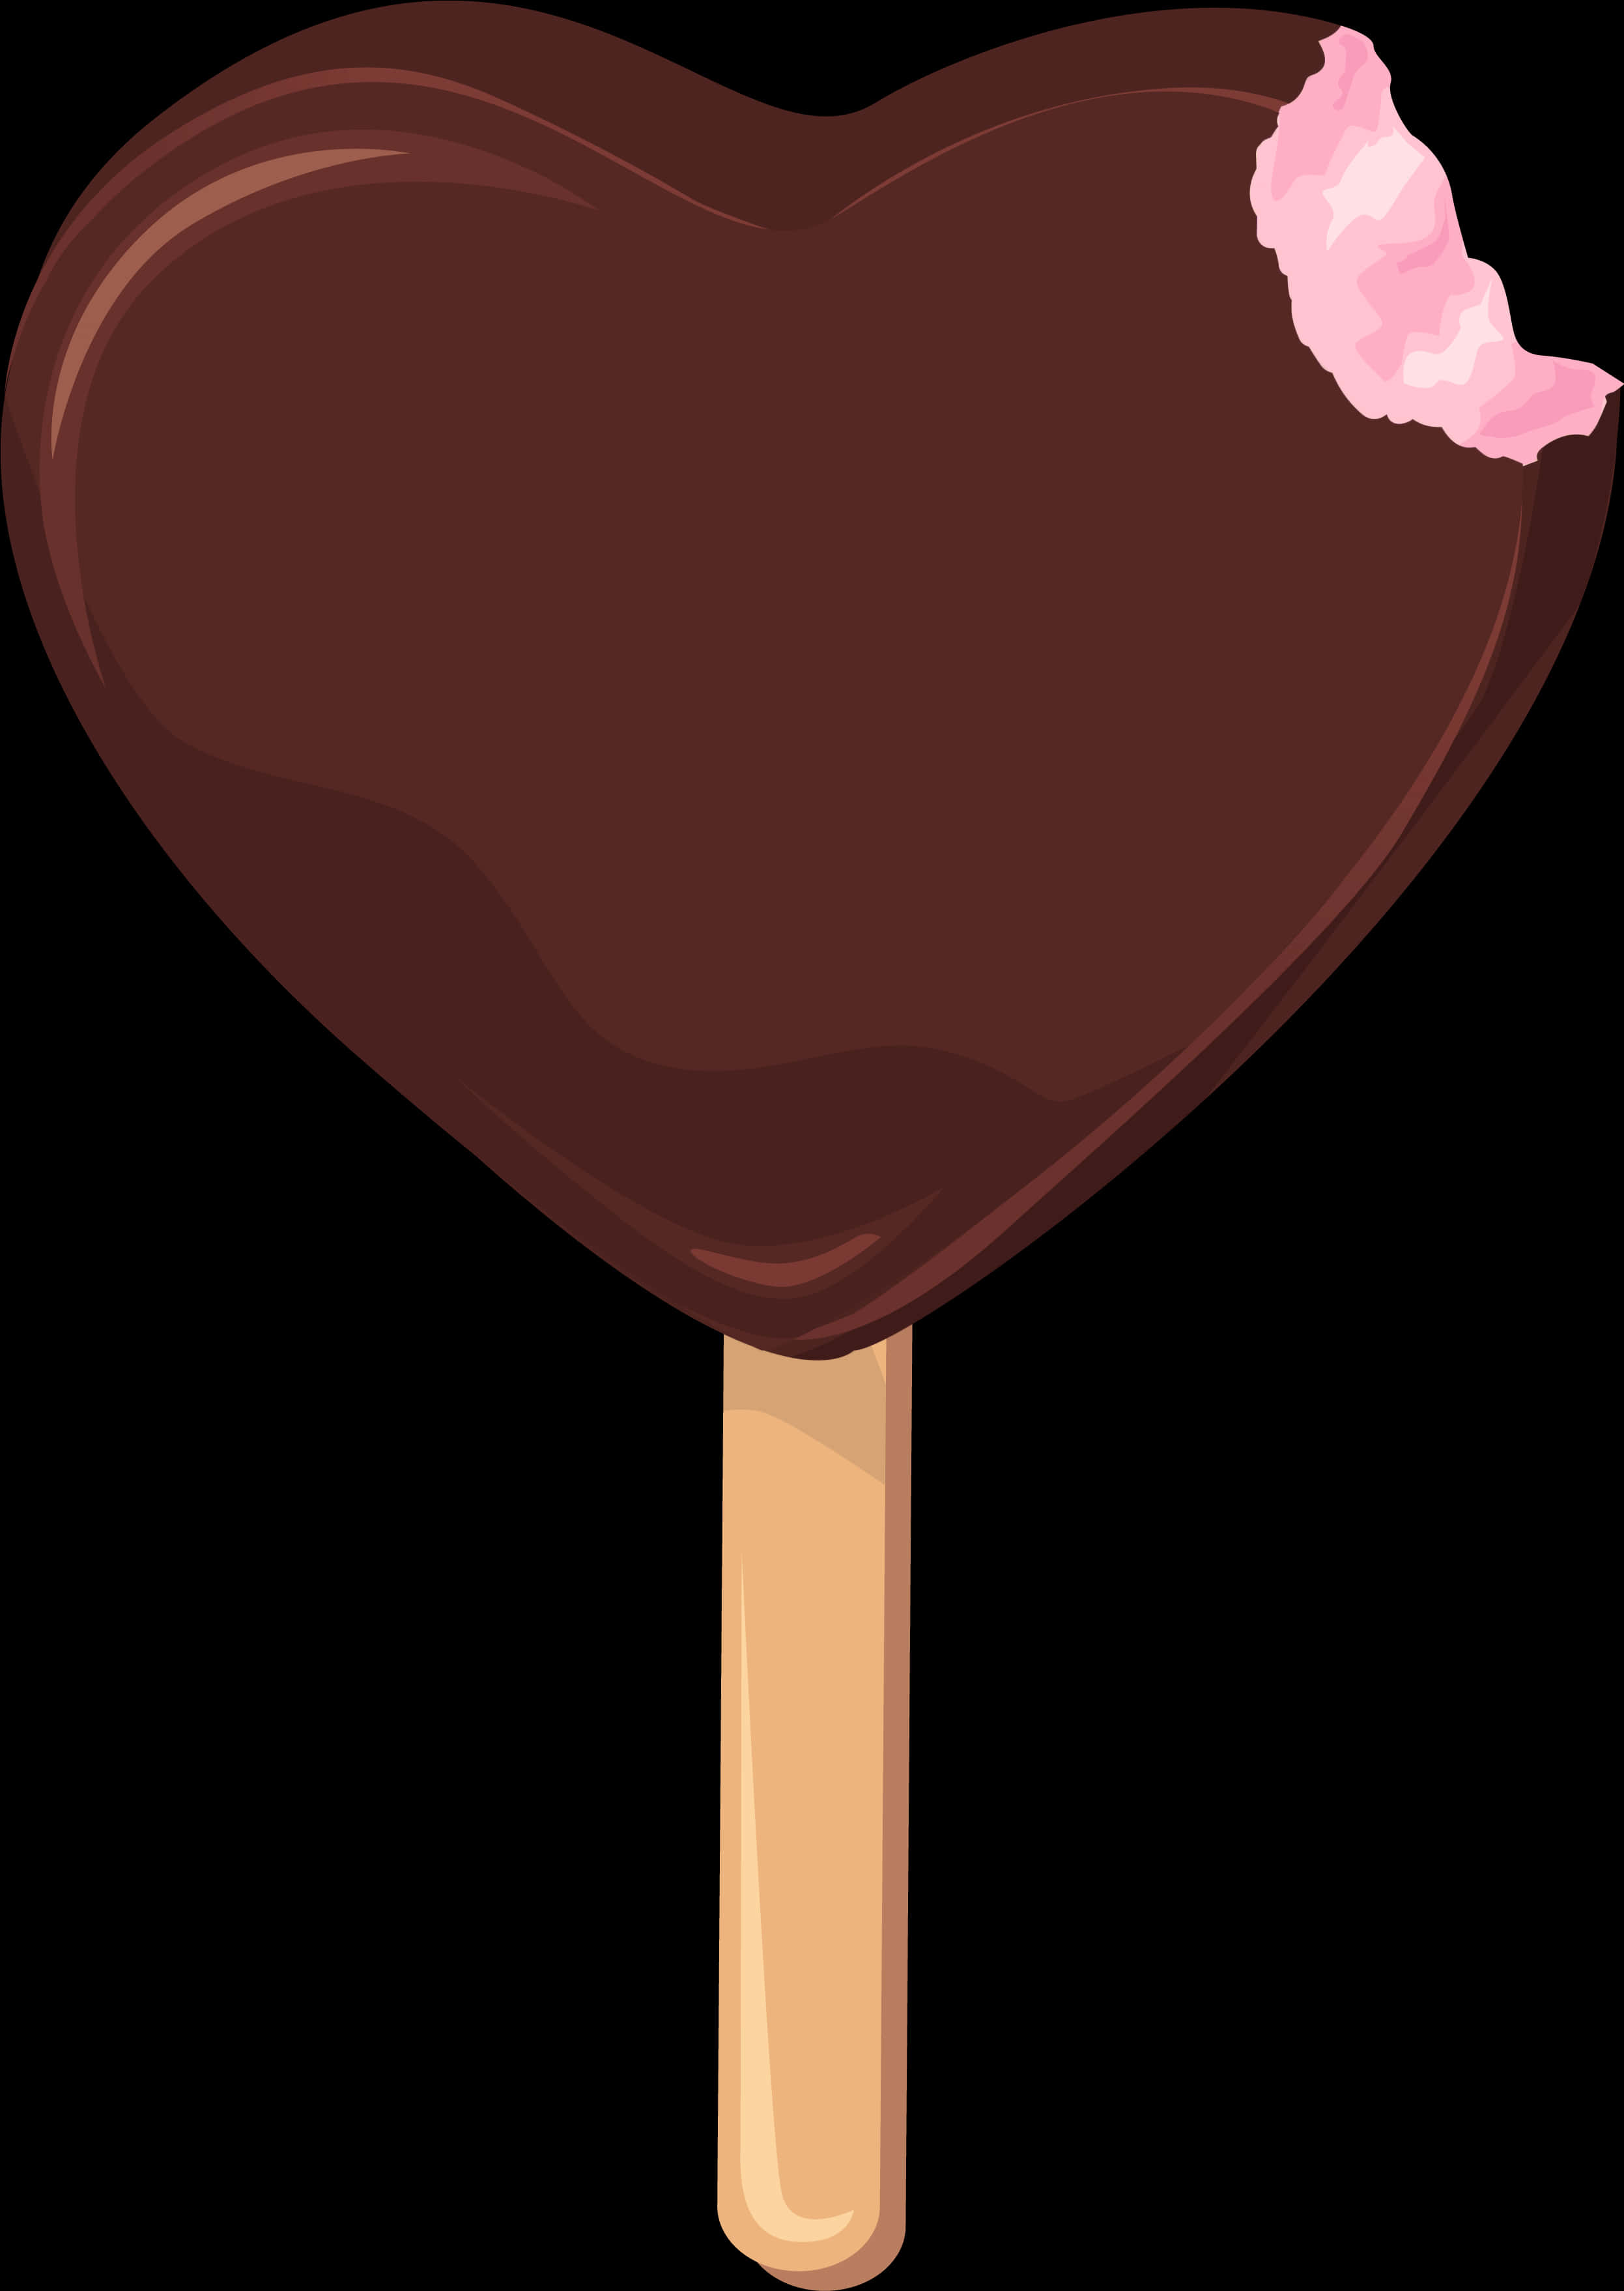 Heart Shaped Chocolate Ice Cream Popsicle Clipart PNG